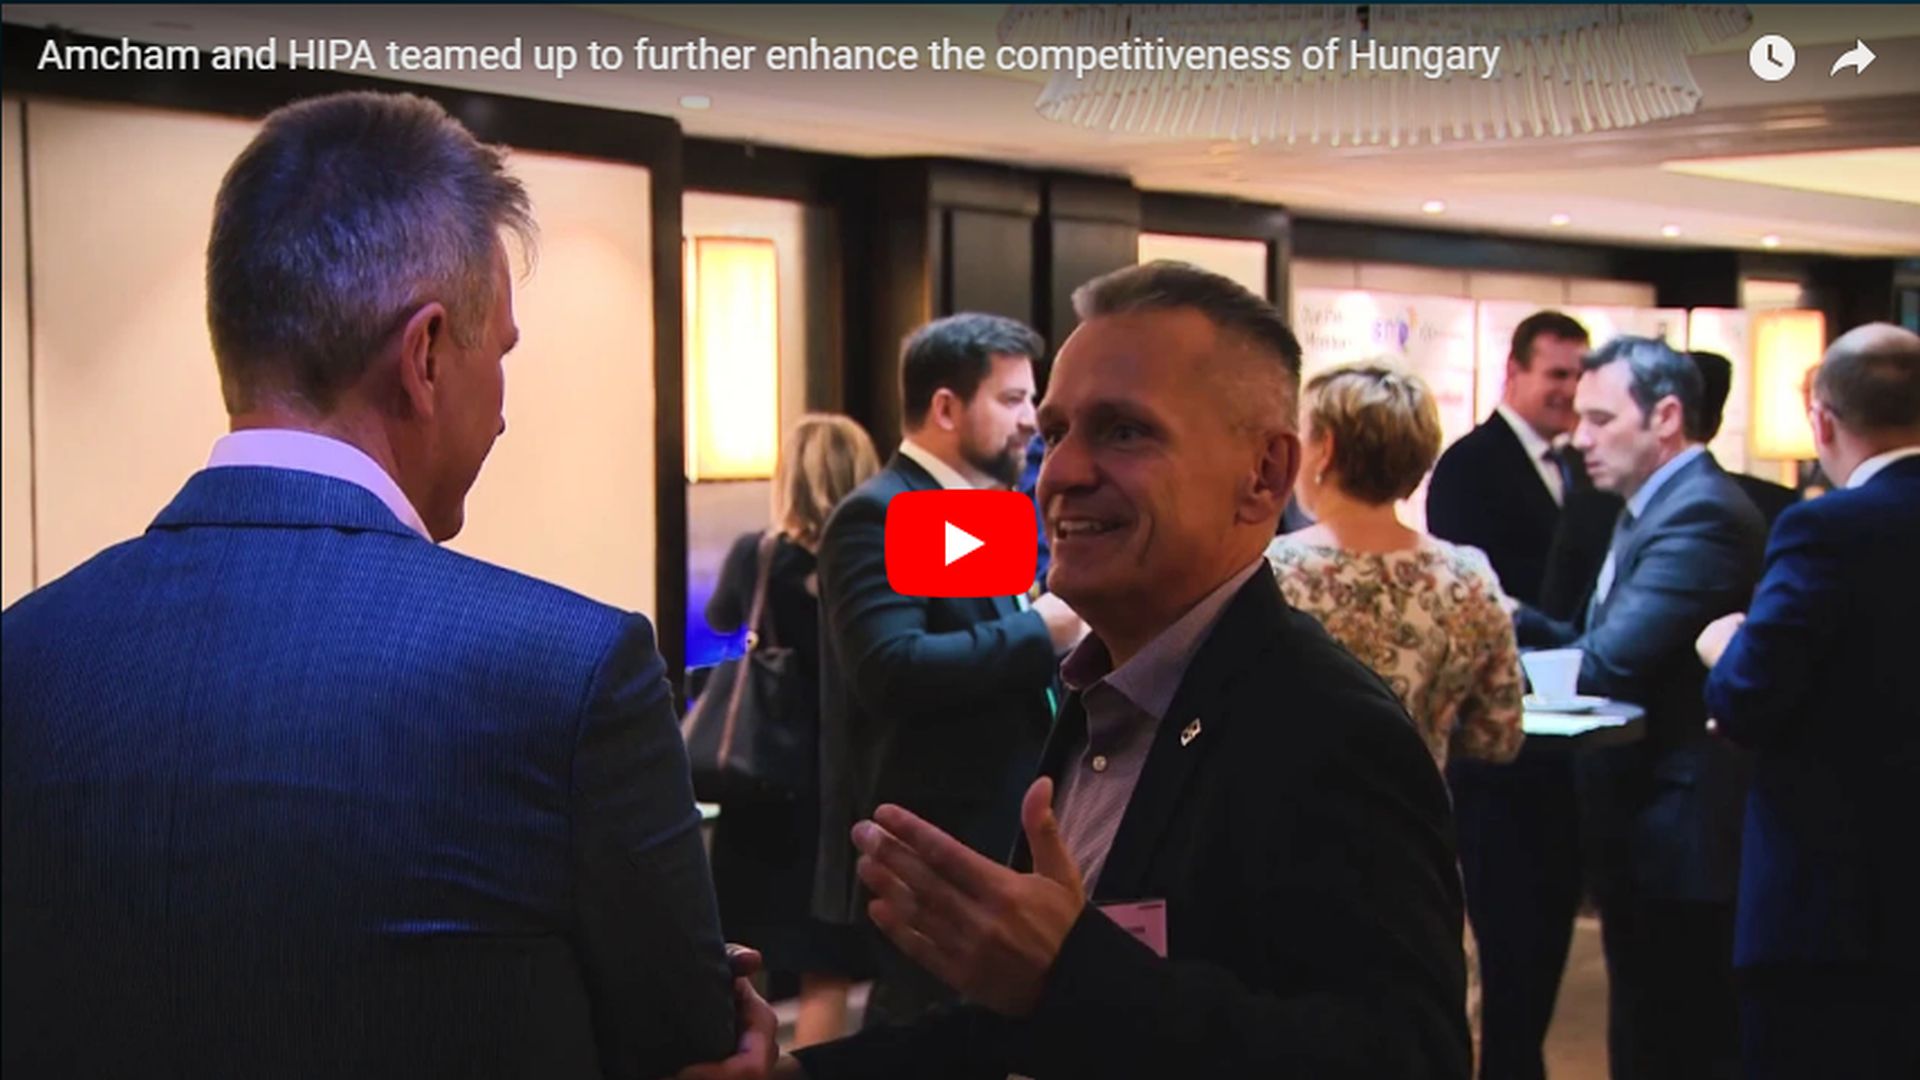 GOVERNMENT-BUSINESS COOPERATION TO ENHANCE THE COMPETITIVENESS OF HUNGARY